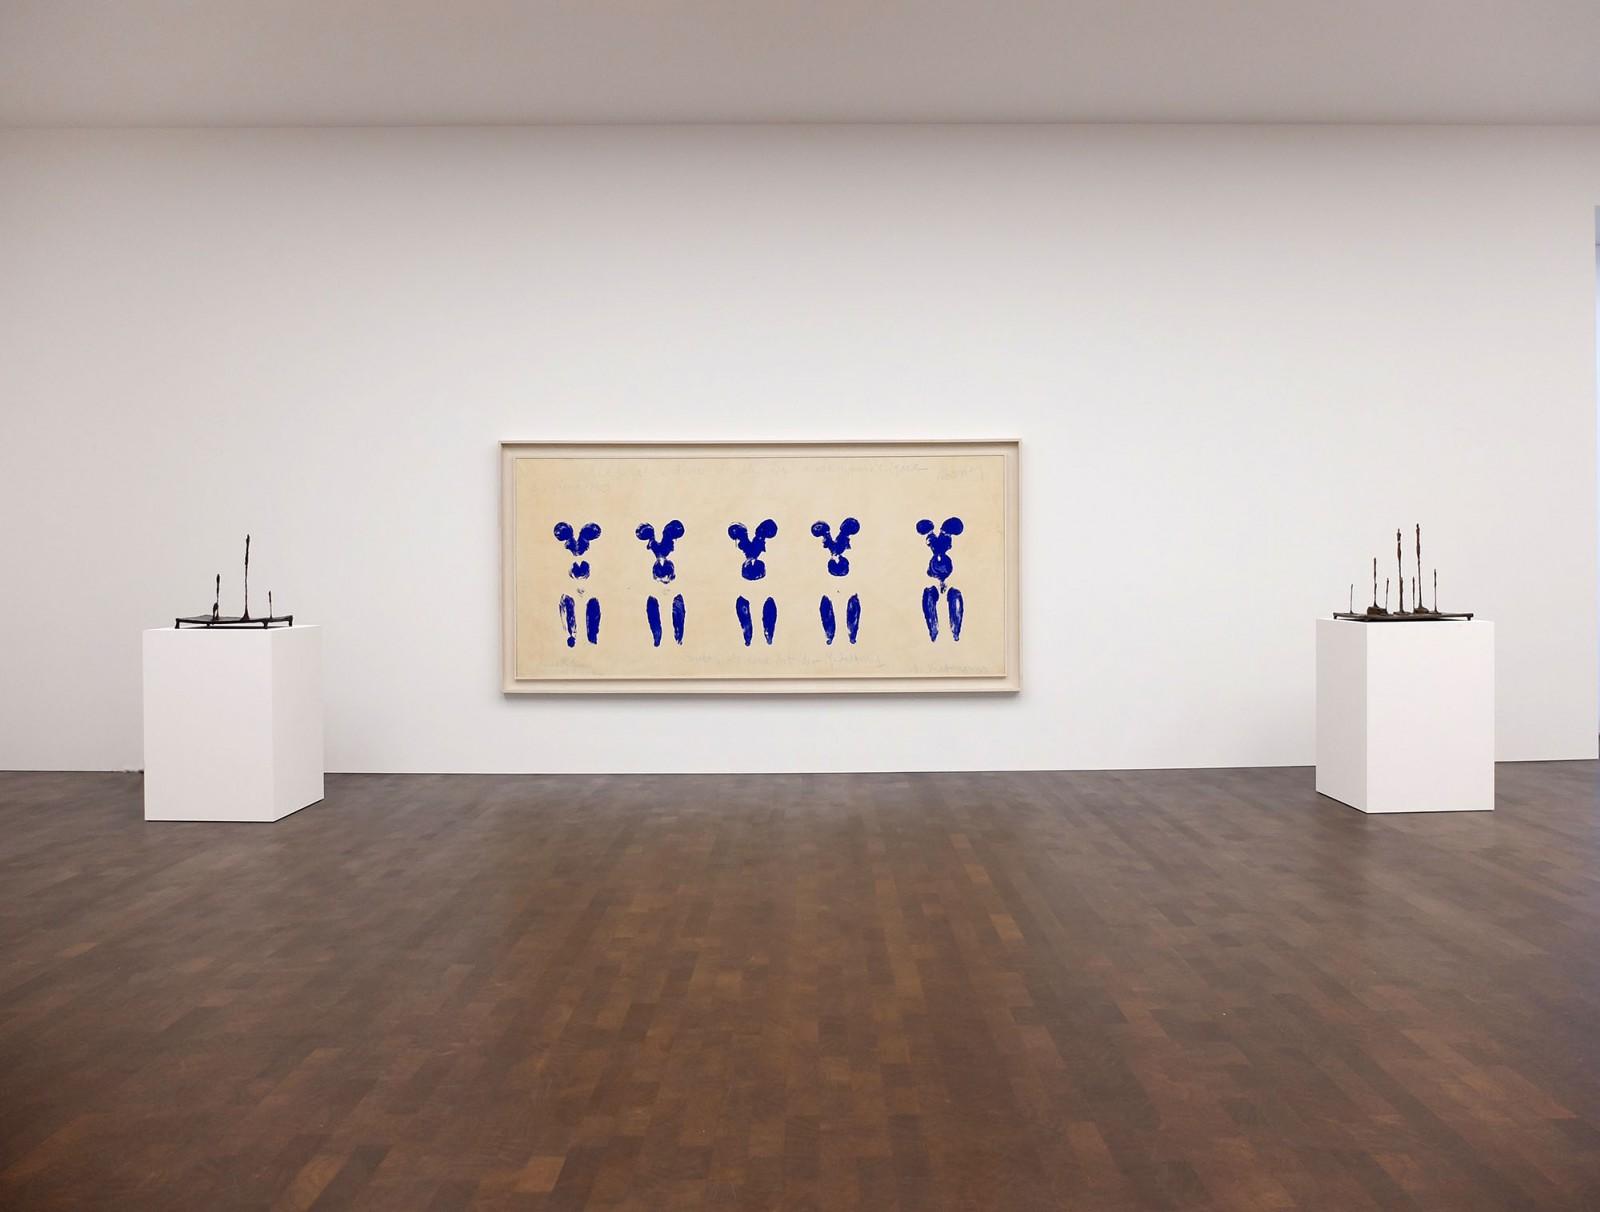 View of the exhibition "Alberto Giacometti, Yves Klein - In search of the Absolute", Gagosian Gallery, 2016